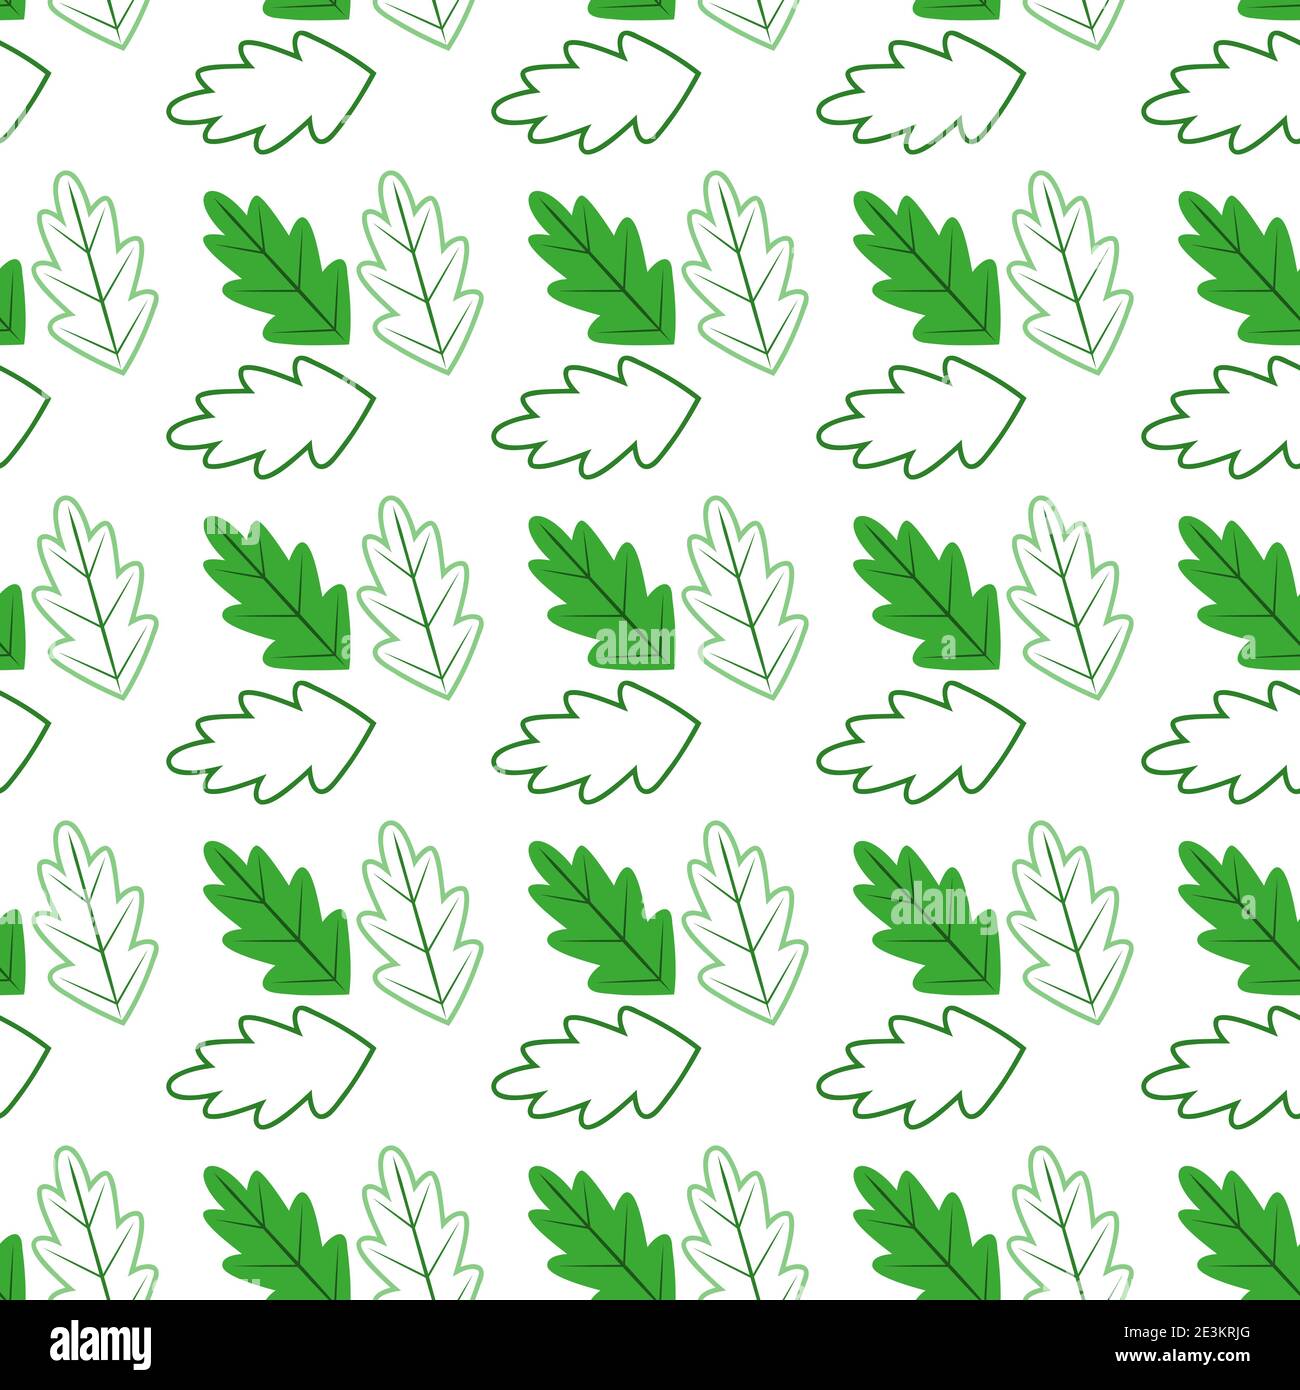 Oak leaves and their outlines on a white background. Seamless vector pattern with oak leaves. Seasonal forest decor. Stock Vector